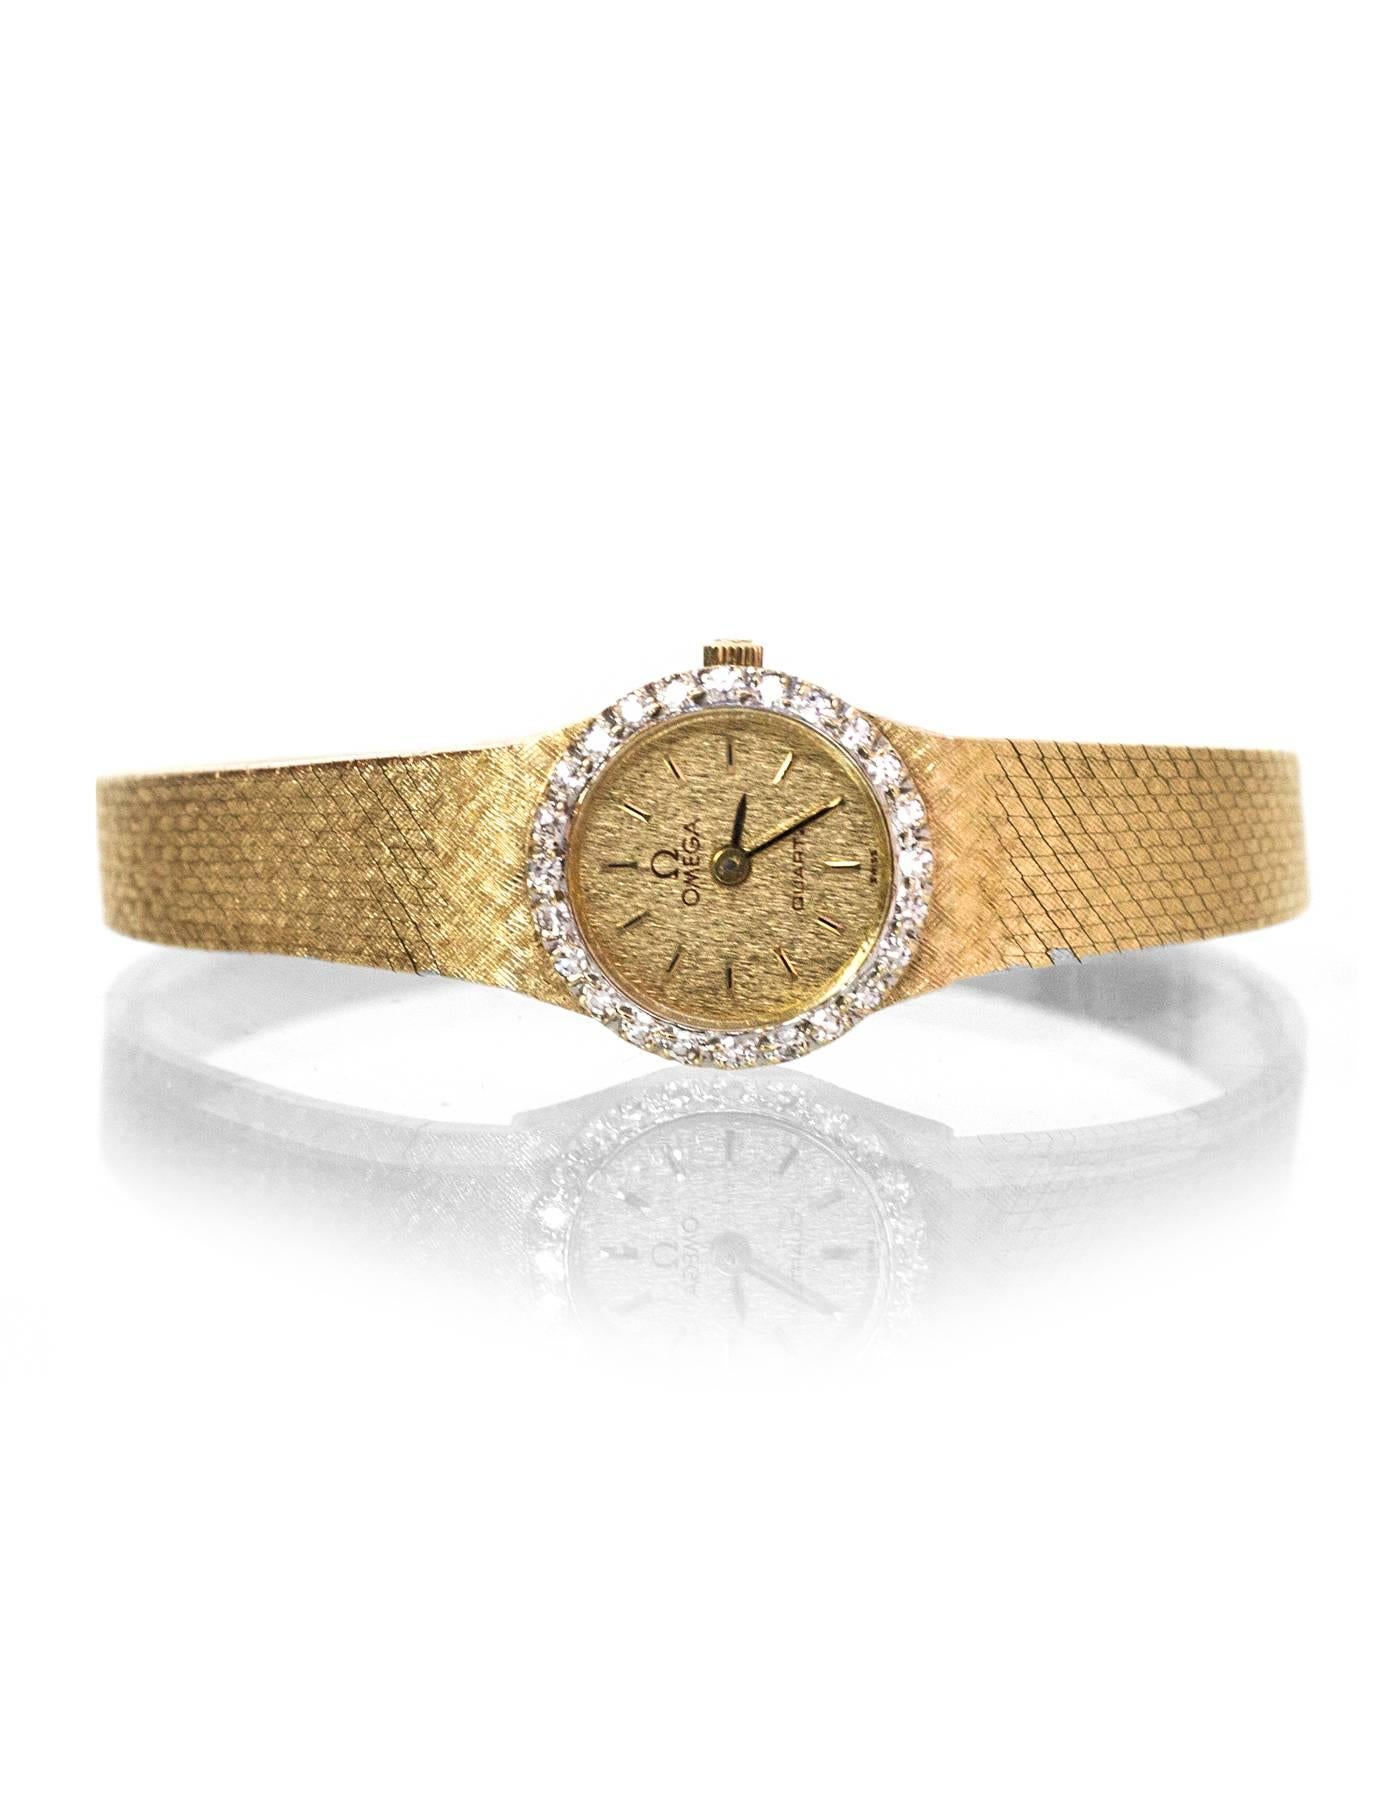 Omega Vintage Diamond & 14k Gold 15mm Watch
Features diamonds framing watch face

Made In: Switzerland
Color: Gold
Materials: 14k gold and diamond
Closure/Opening: Butterfly clasp 
Stamp: 14k GOLD 1375
Movement: Quartz
Overall Condition: Excellent